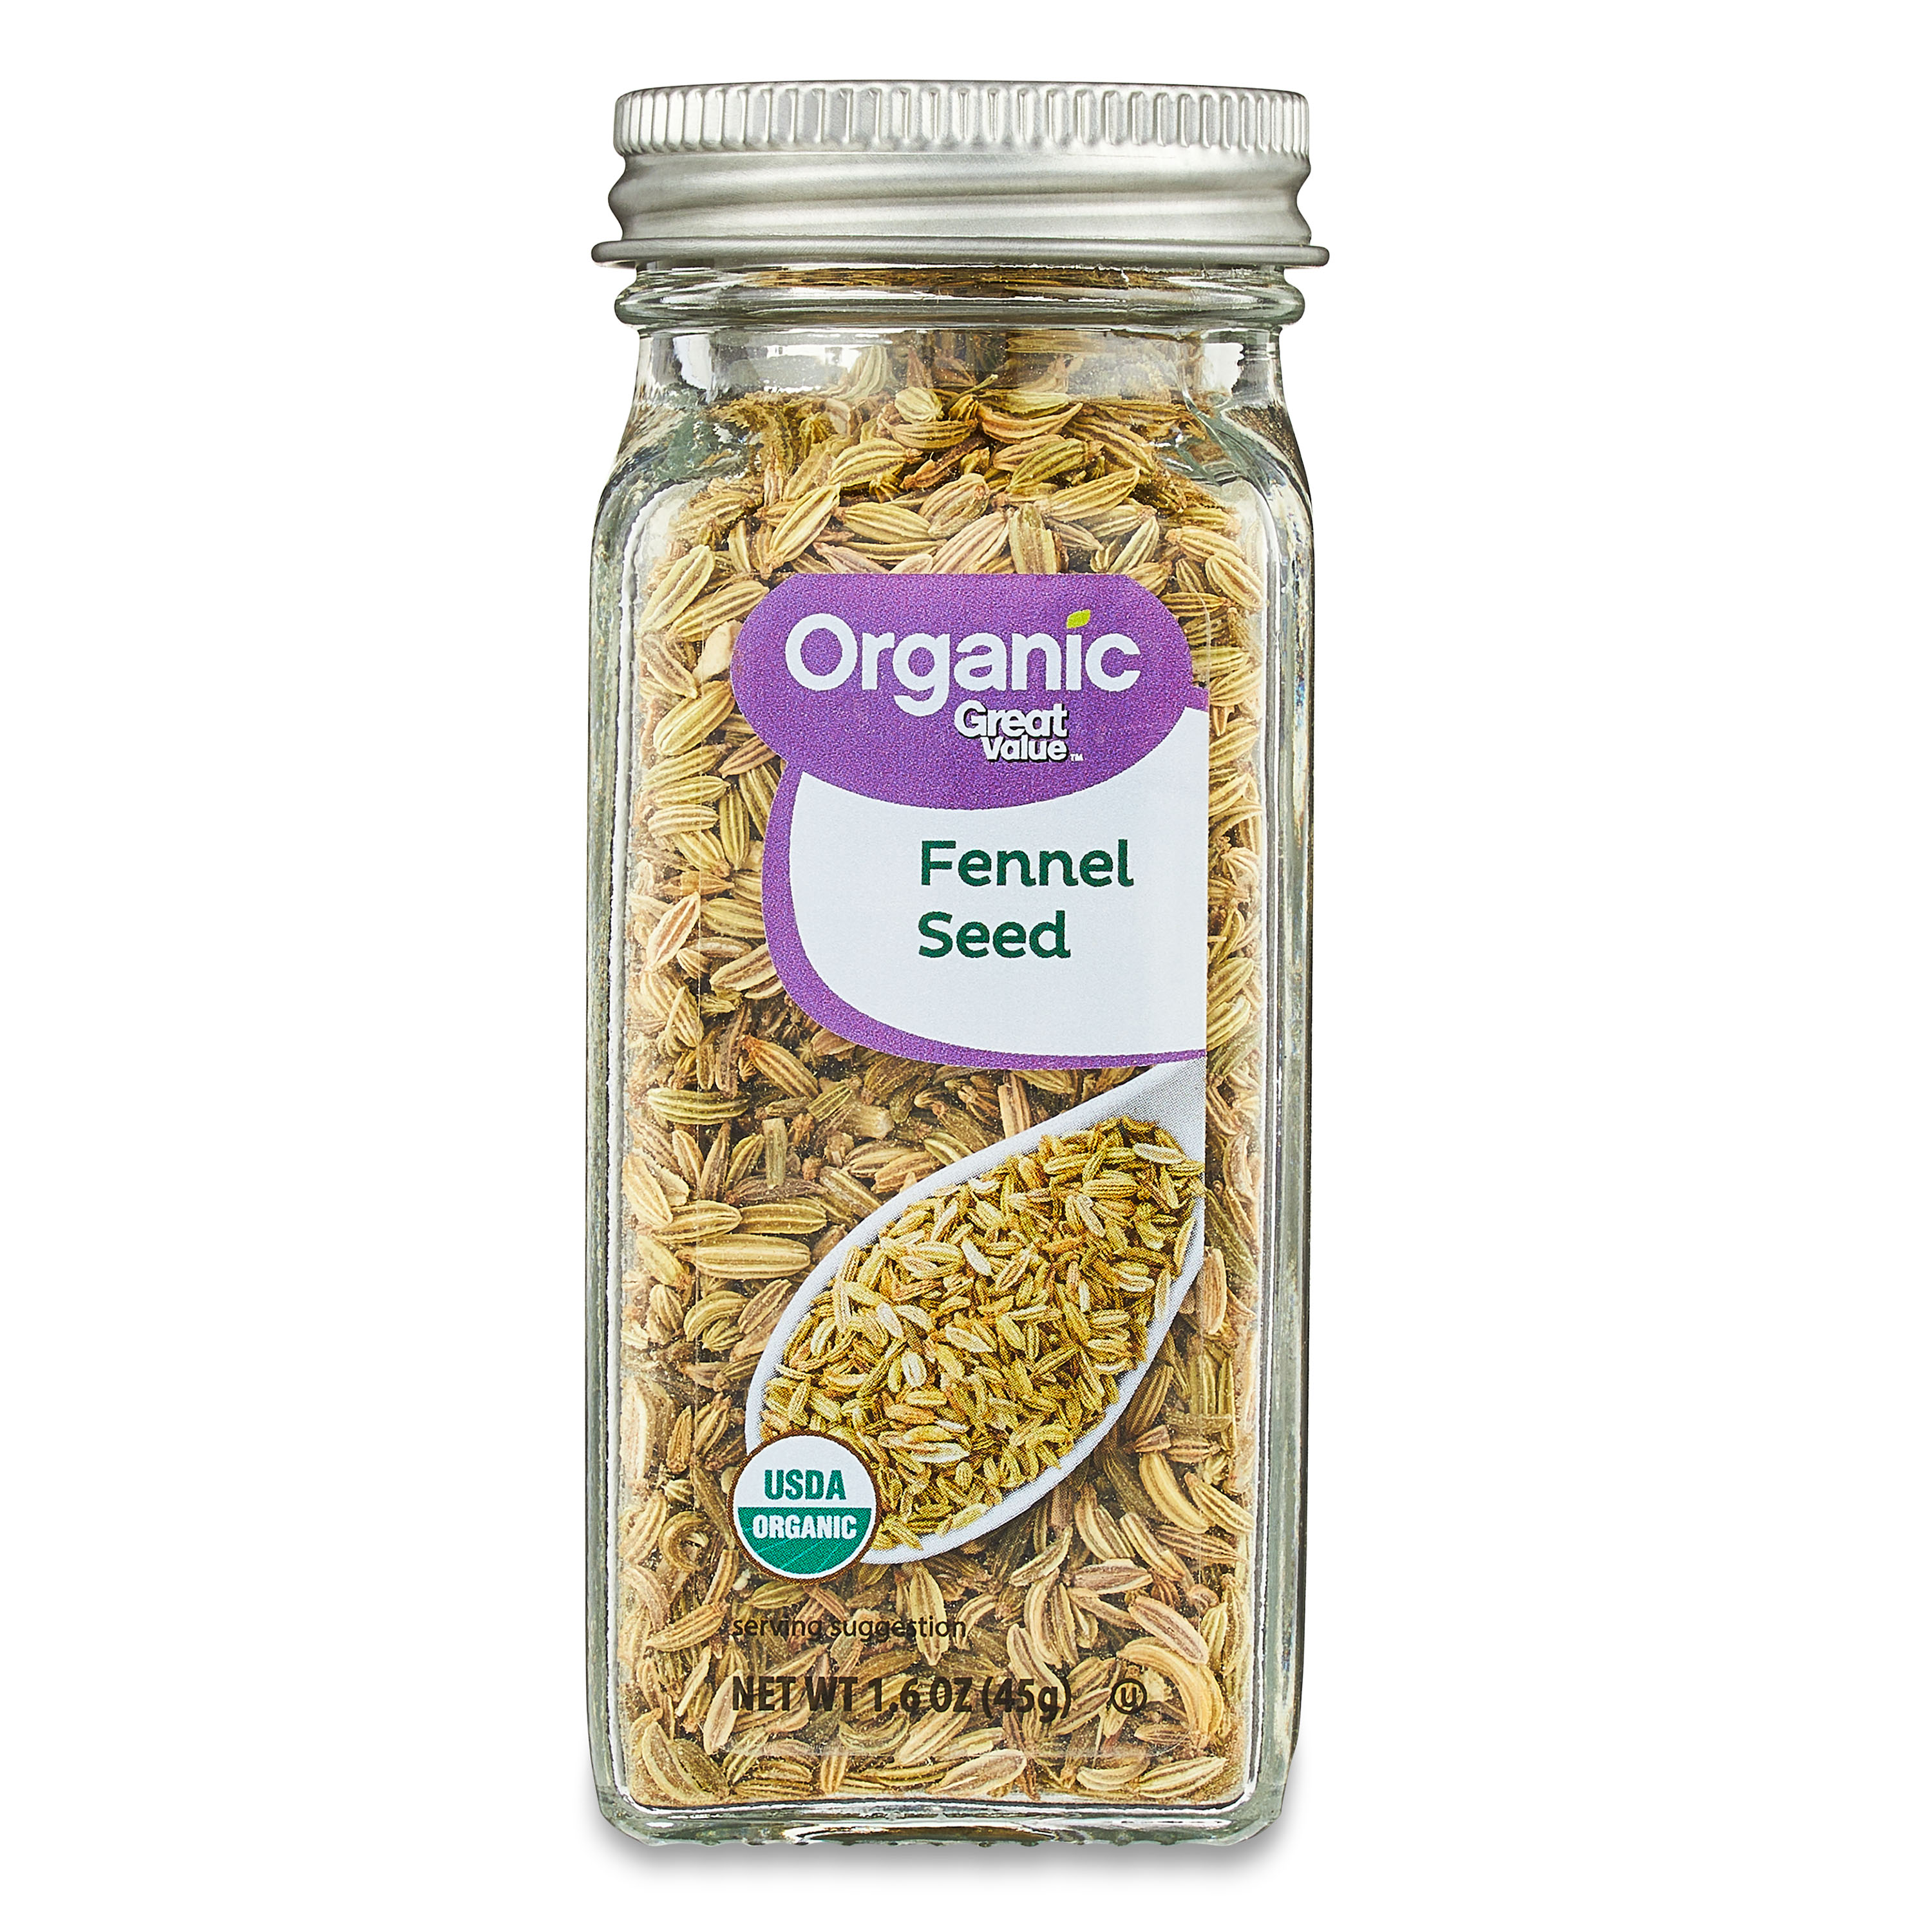 Great Value Organic Fennel Seed, 1.6 oz - image 1 of 7